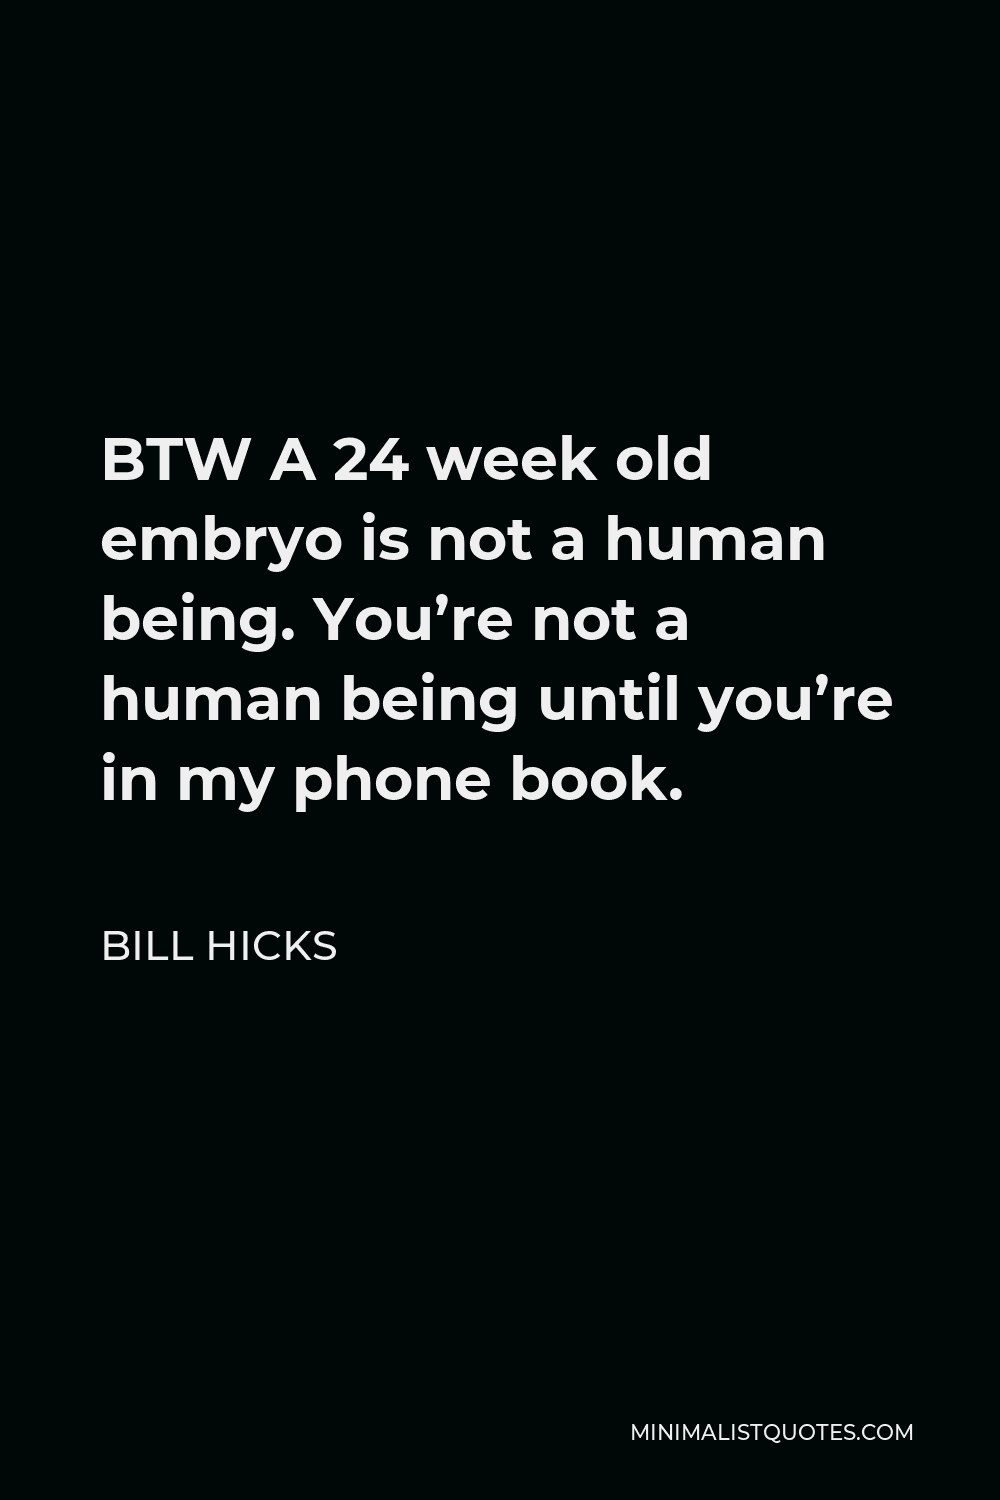 Bill Hicks Quote - BTW A 24 week old embryo is not a human being. You’re not a human being until you’re in my phone book.